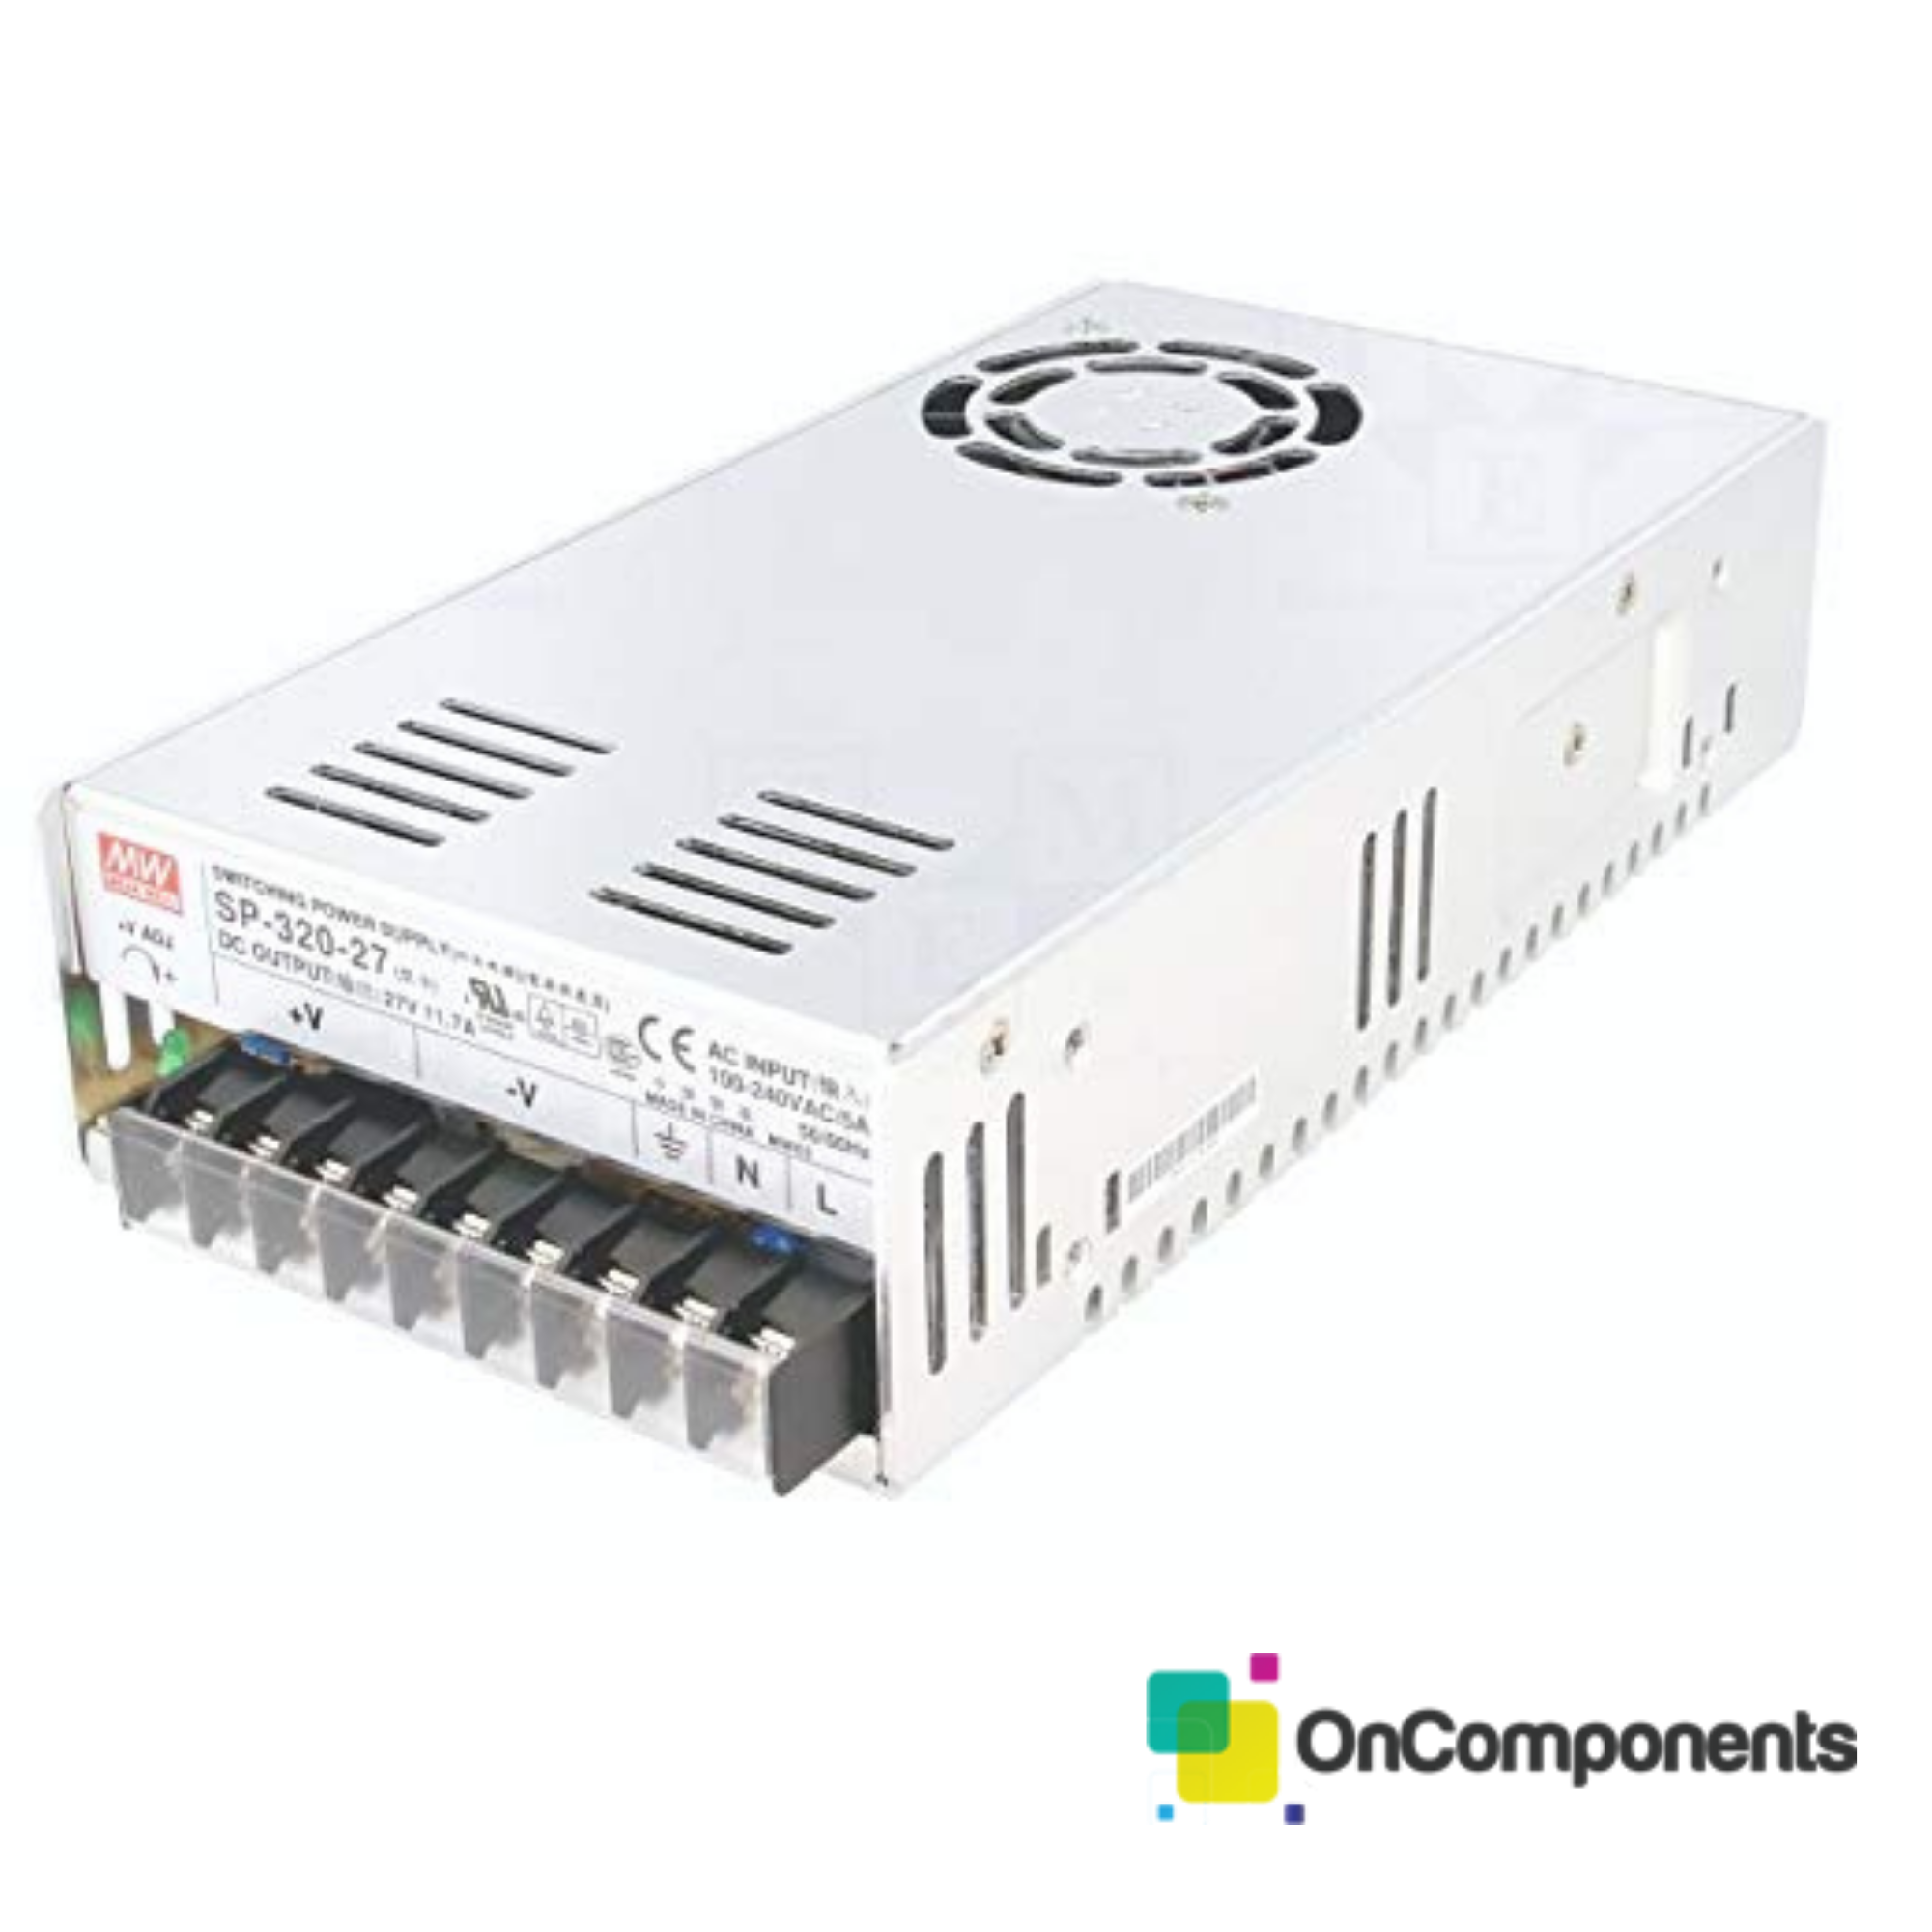 Meanwell SP-320-27 Enclosed Switching AC-to-DC Power Supply